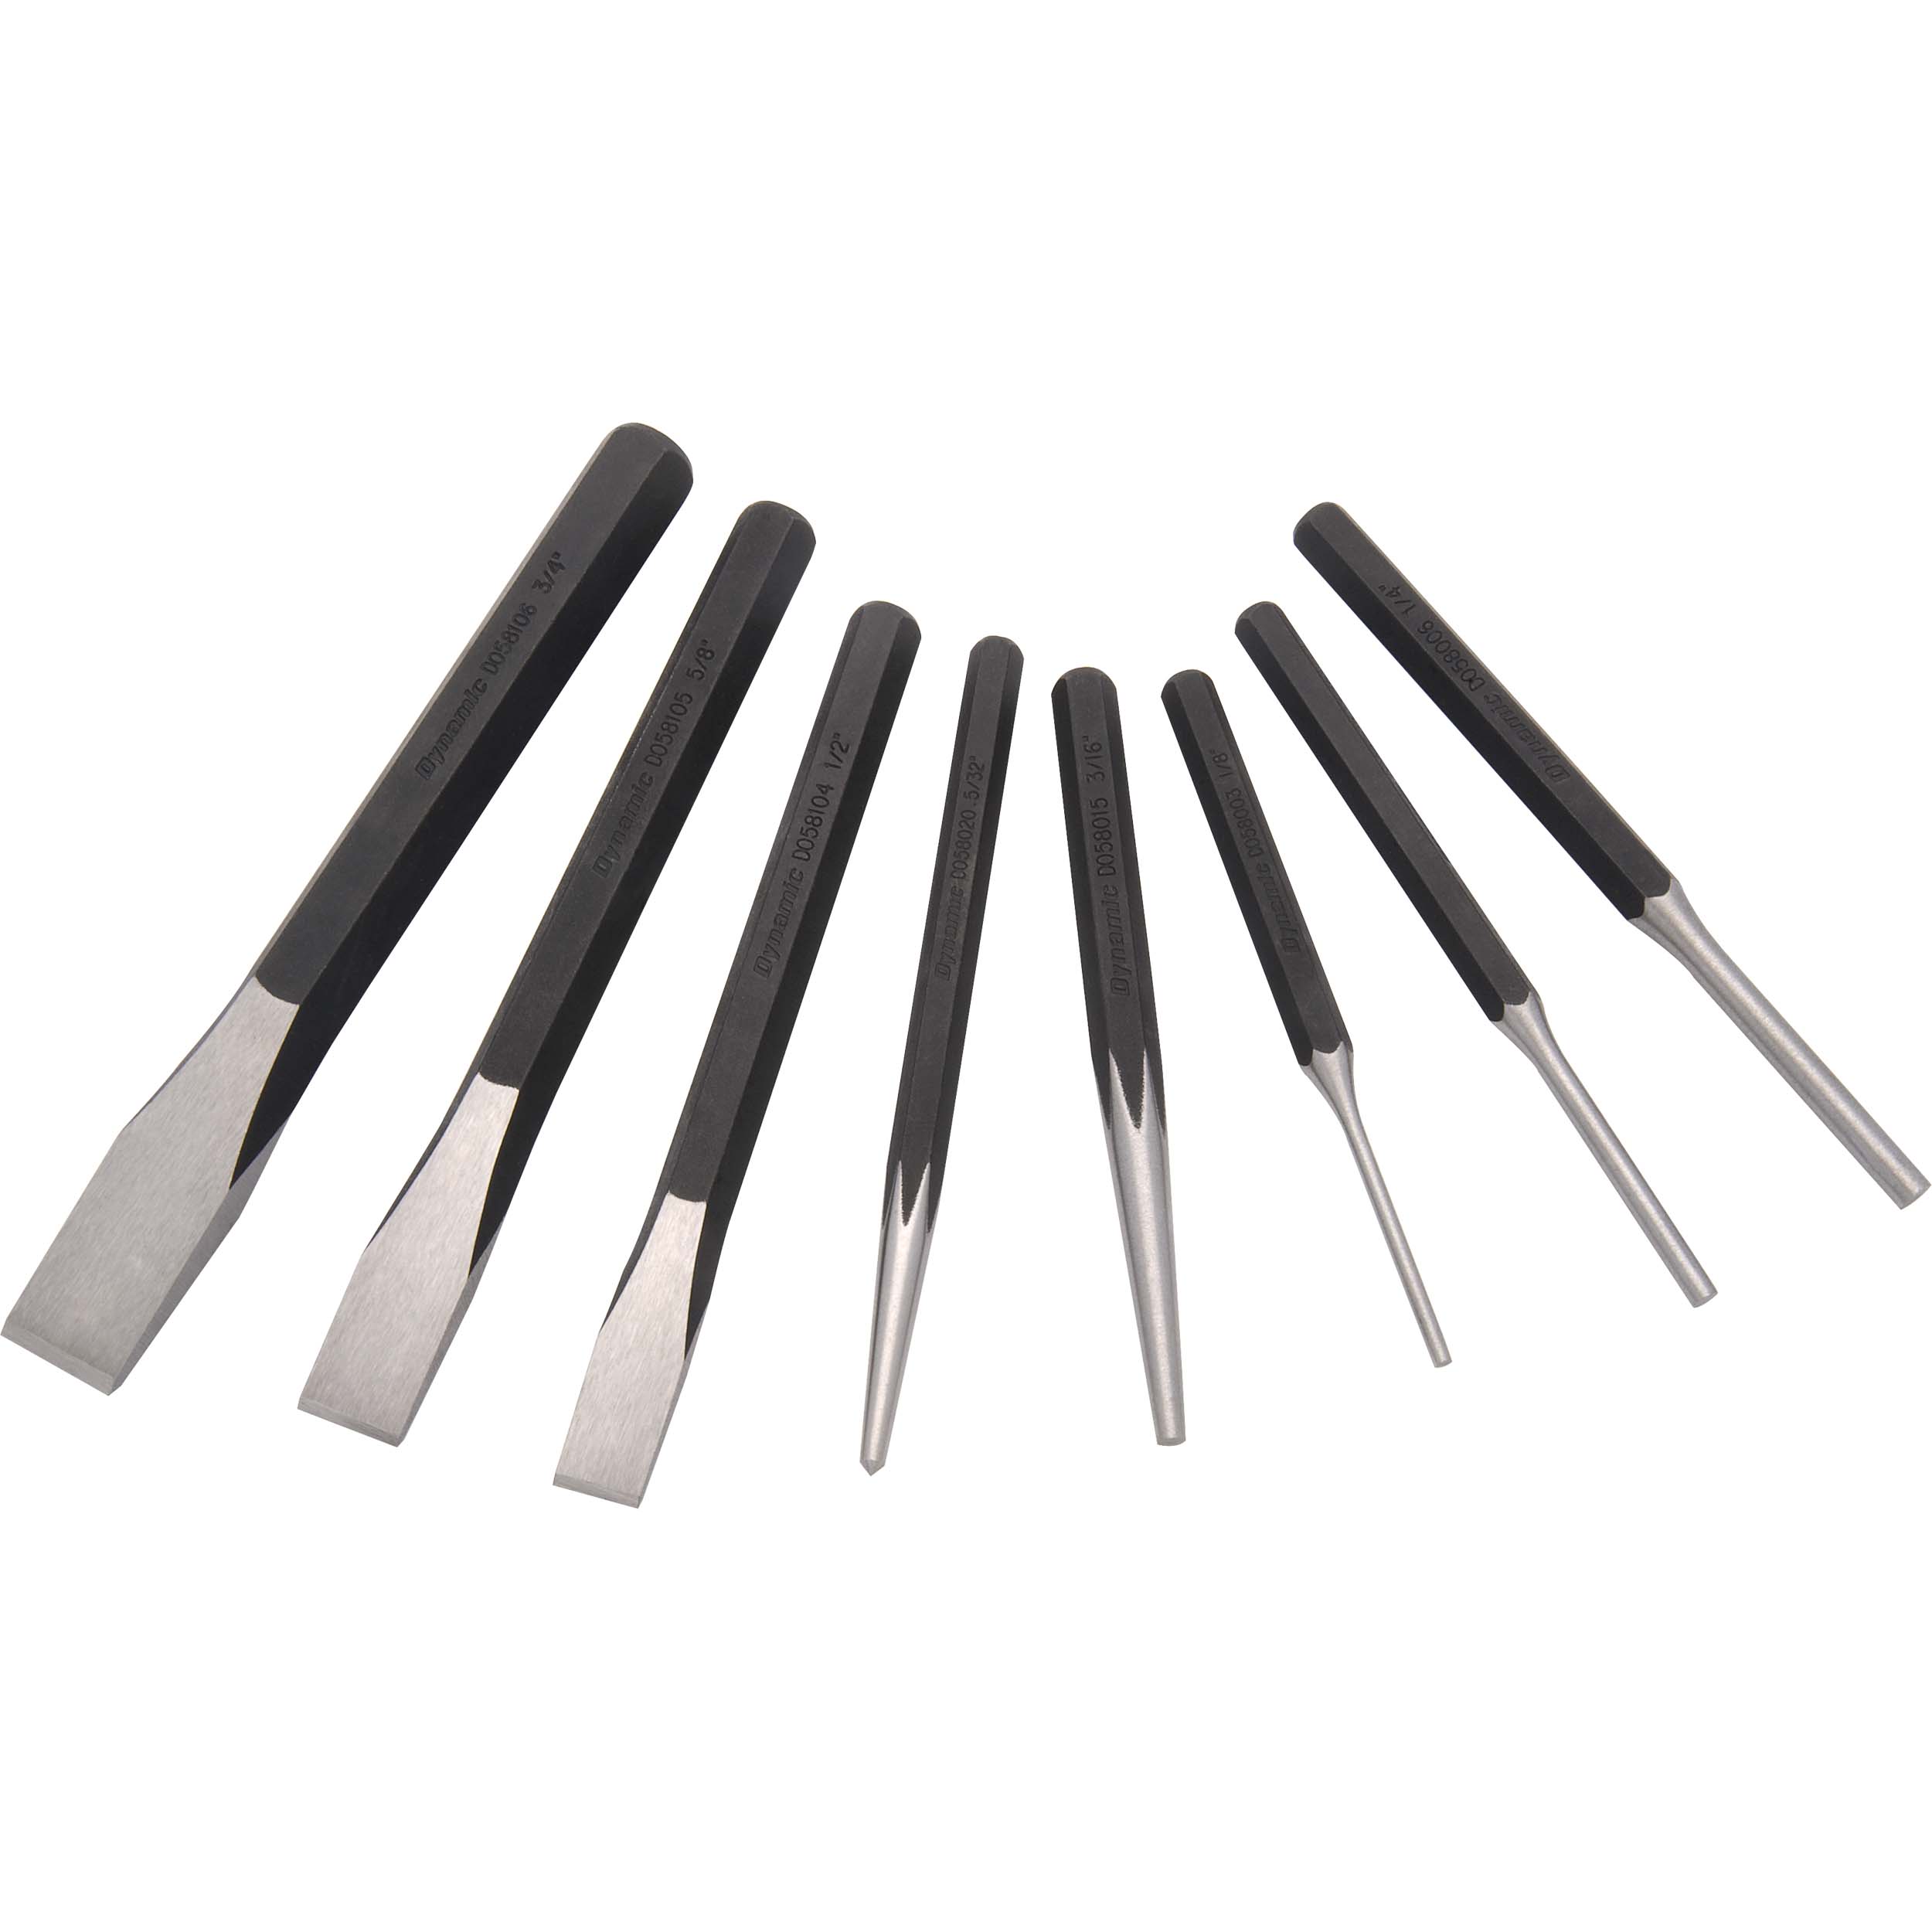 Tools 8pc Punch And Chisel Set